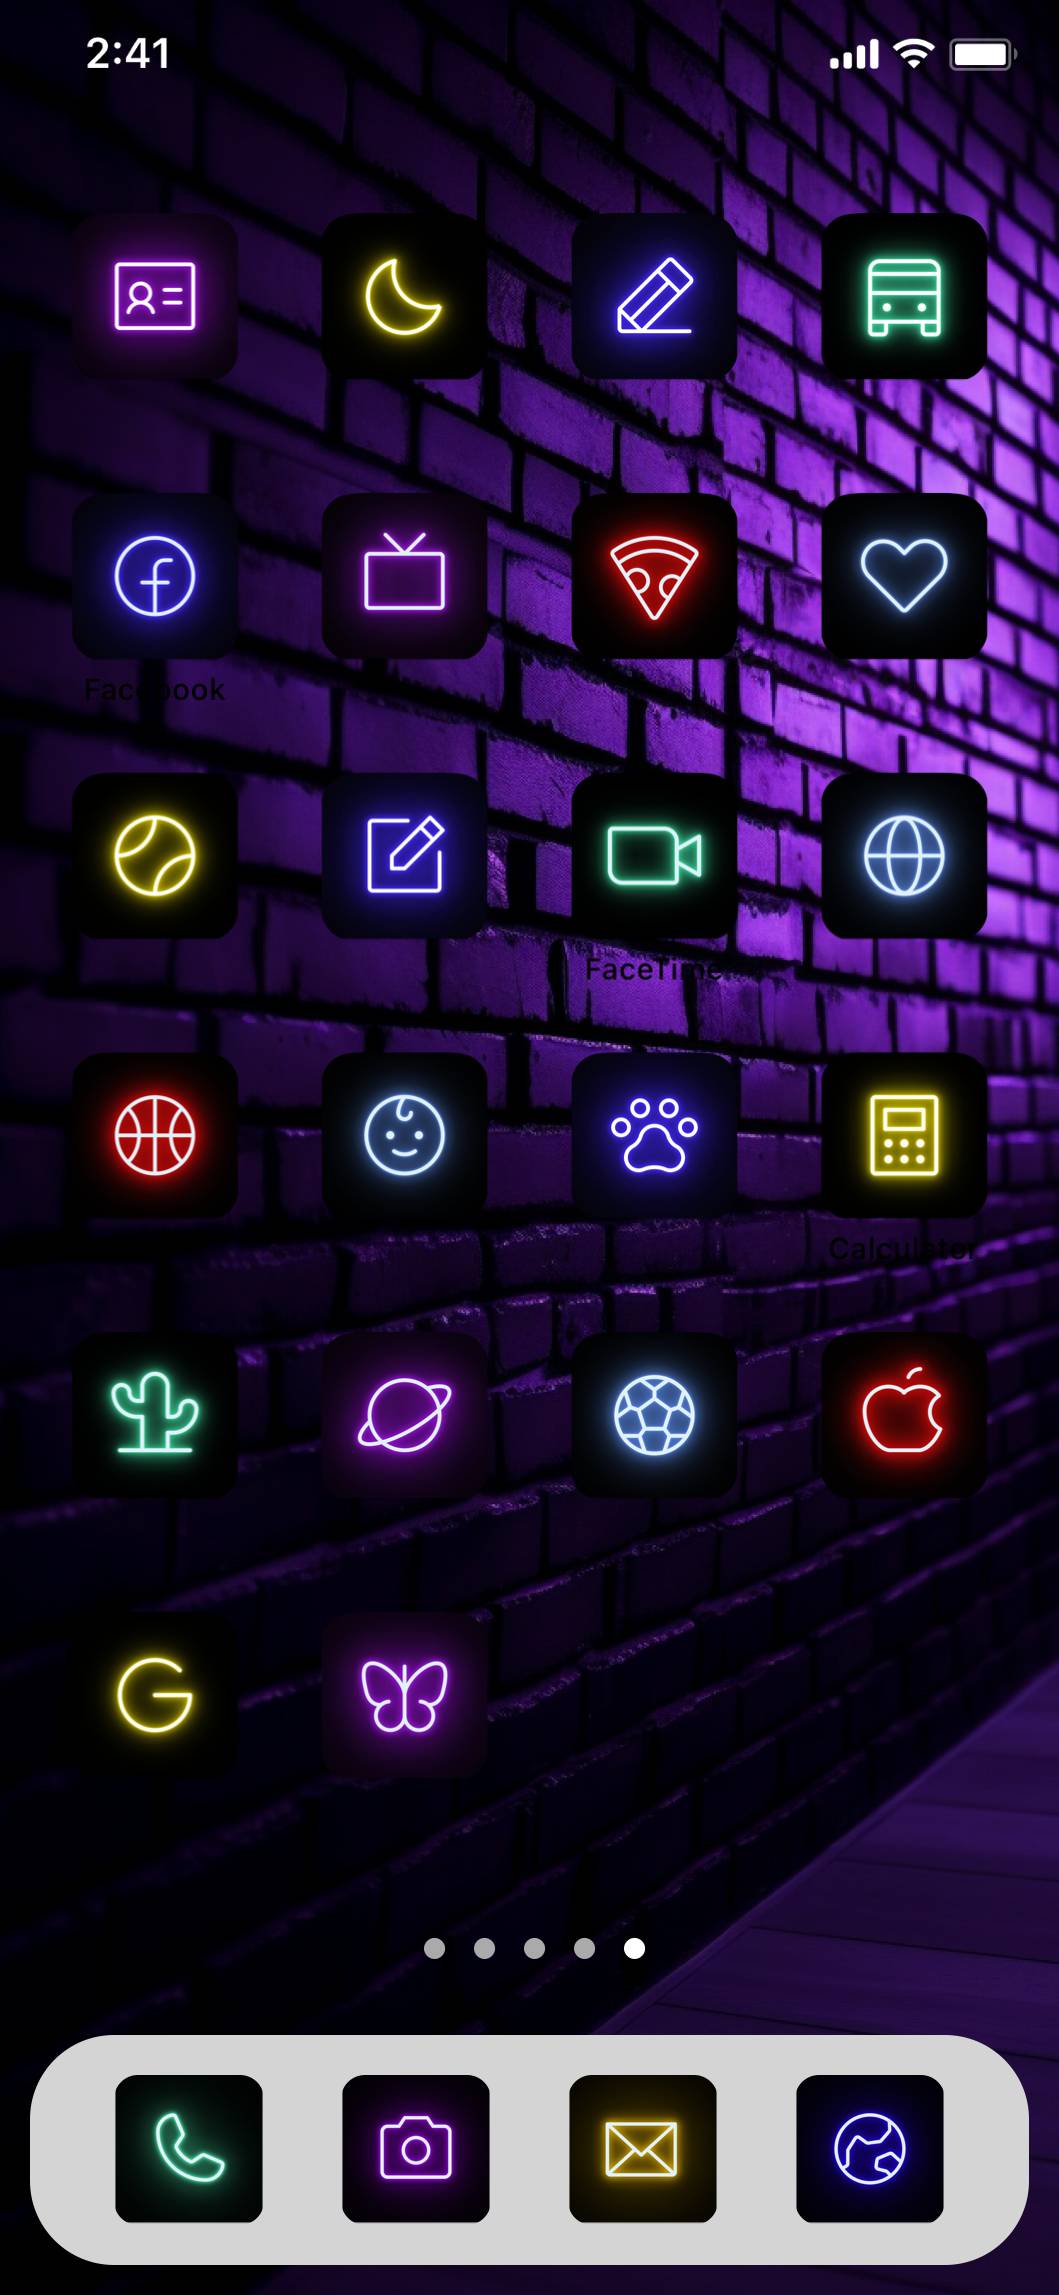 Neon cool home screen themeHome Screen ideas[66HZd9zvvw6sQxepySY9]